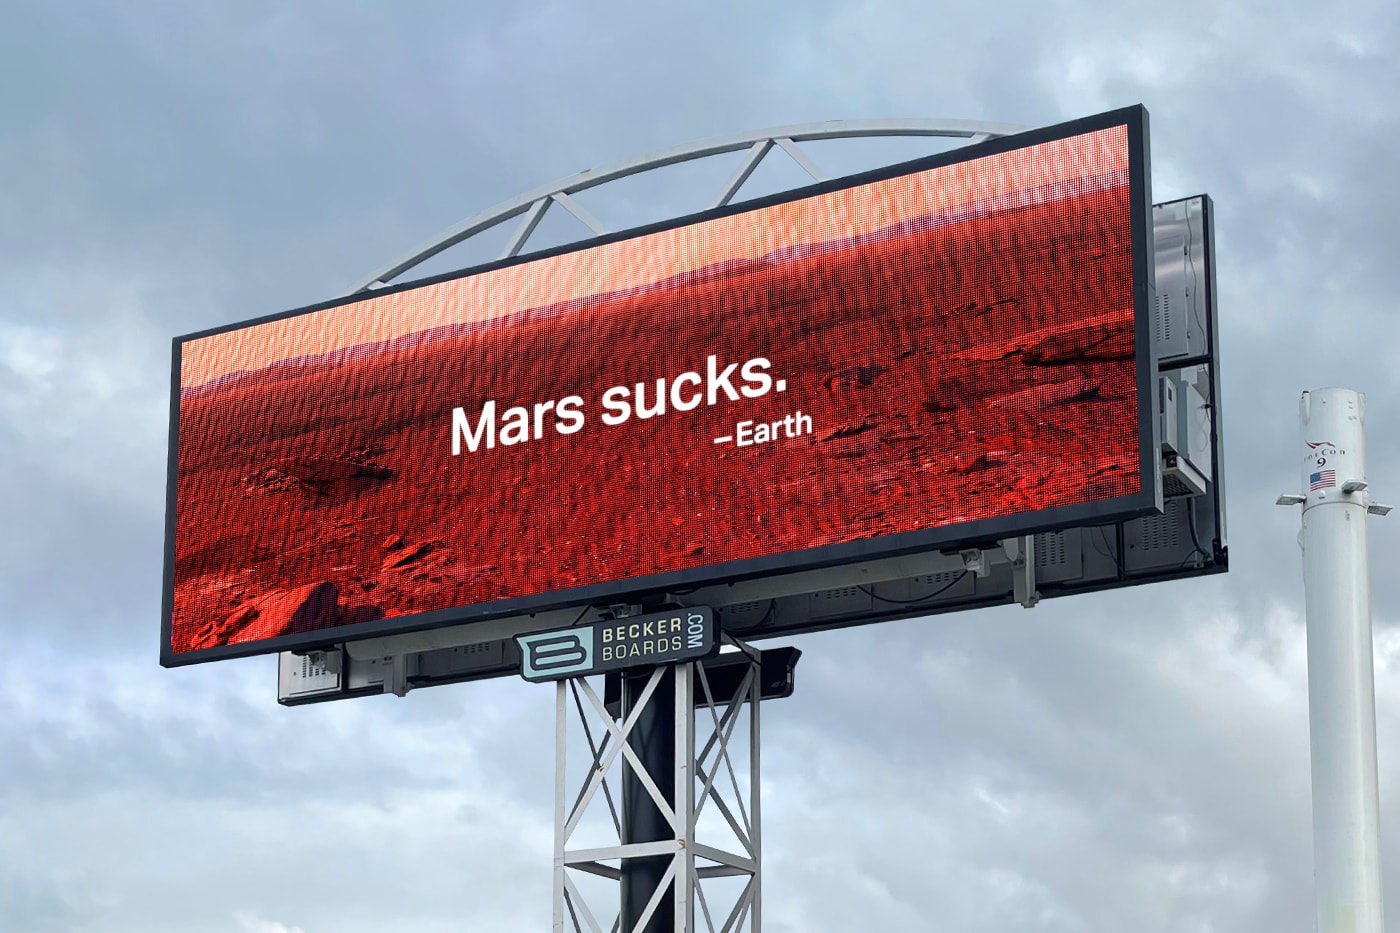 The Mars Sucks Project SpaceX Earth Day Billboard News greenpeace world wildlife surfrider environment spacex mars elon musk 